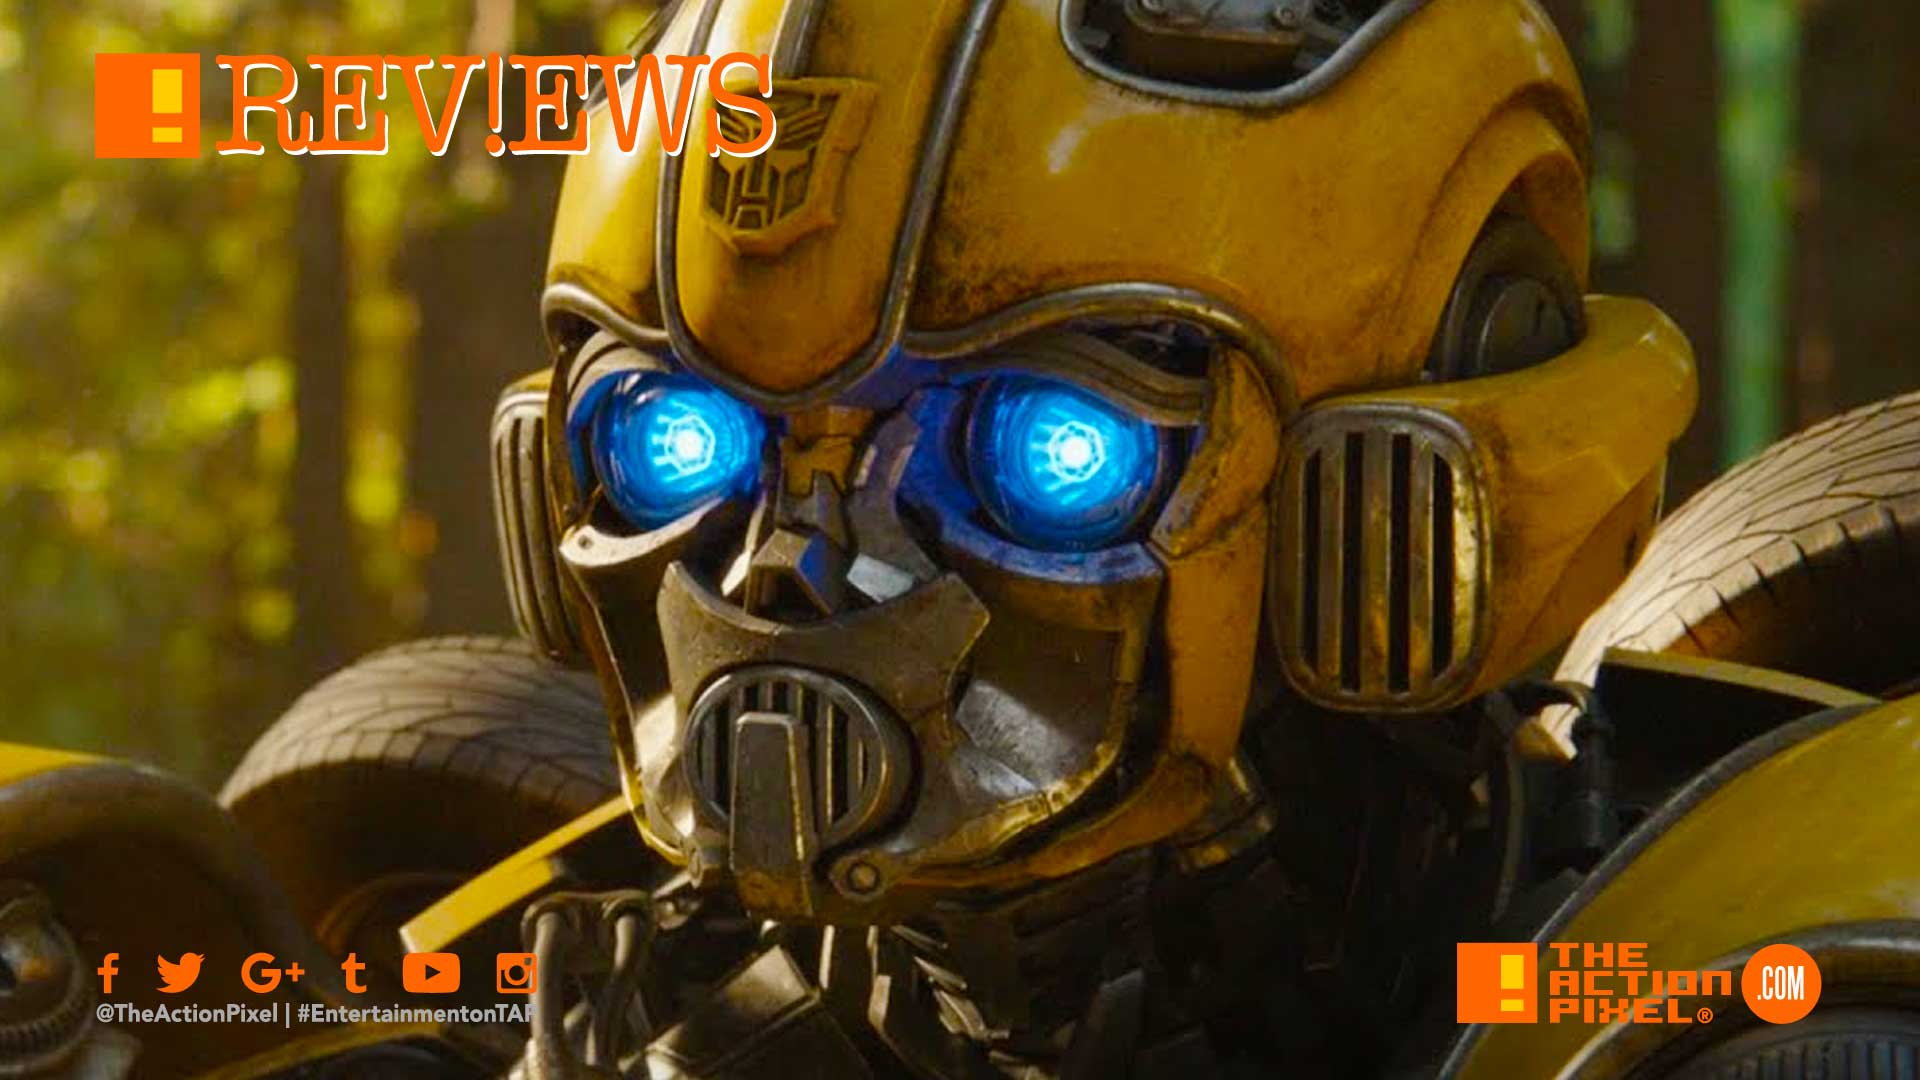 transformers, paramount pictures, Bumblebee, Hailee Steinfeld ,John Cena, Travis Knight ,Bumblebee Movie, the action pixel, entertainment on tap